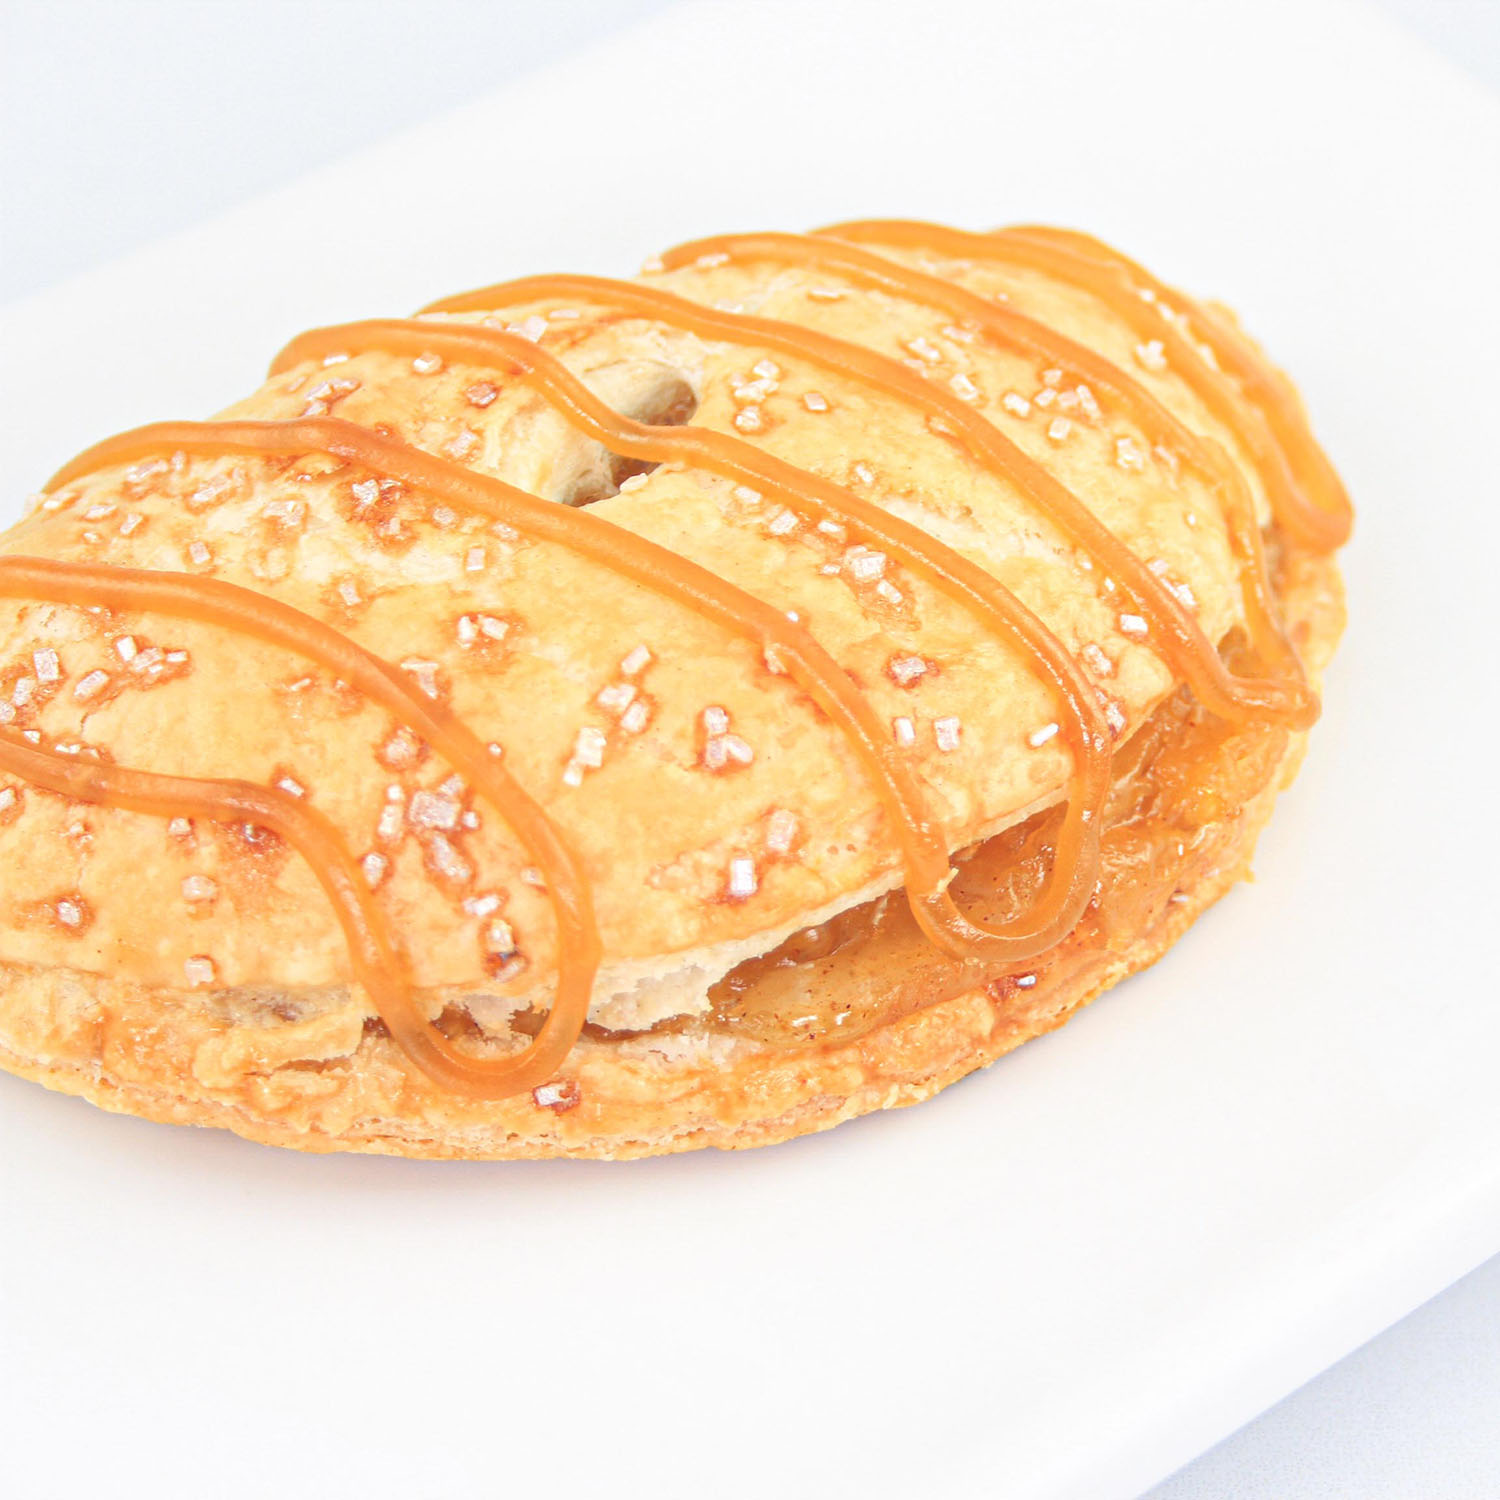 Caramel Apple Pie Pocket showing the drizzled caramel and sugar crystals embellishing the surface of the pocket pie